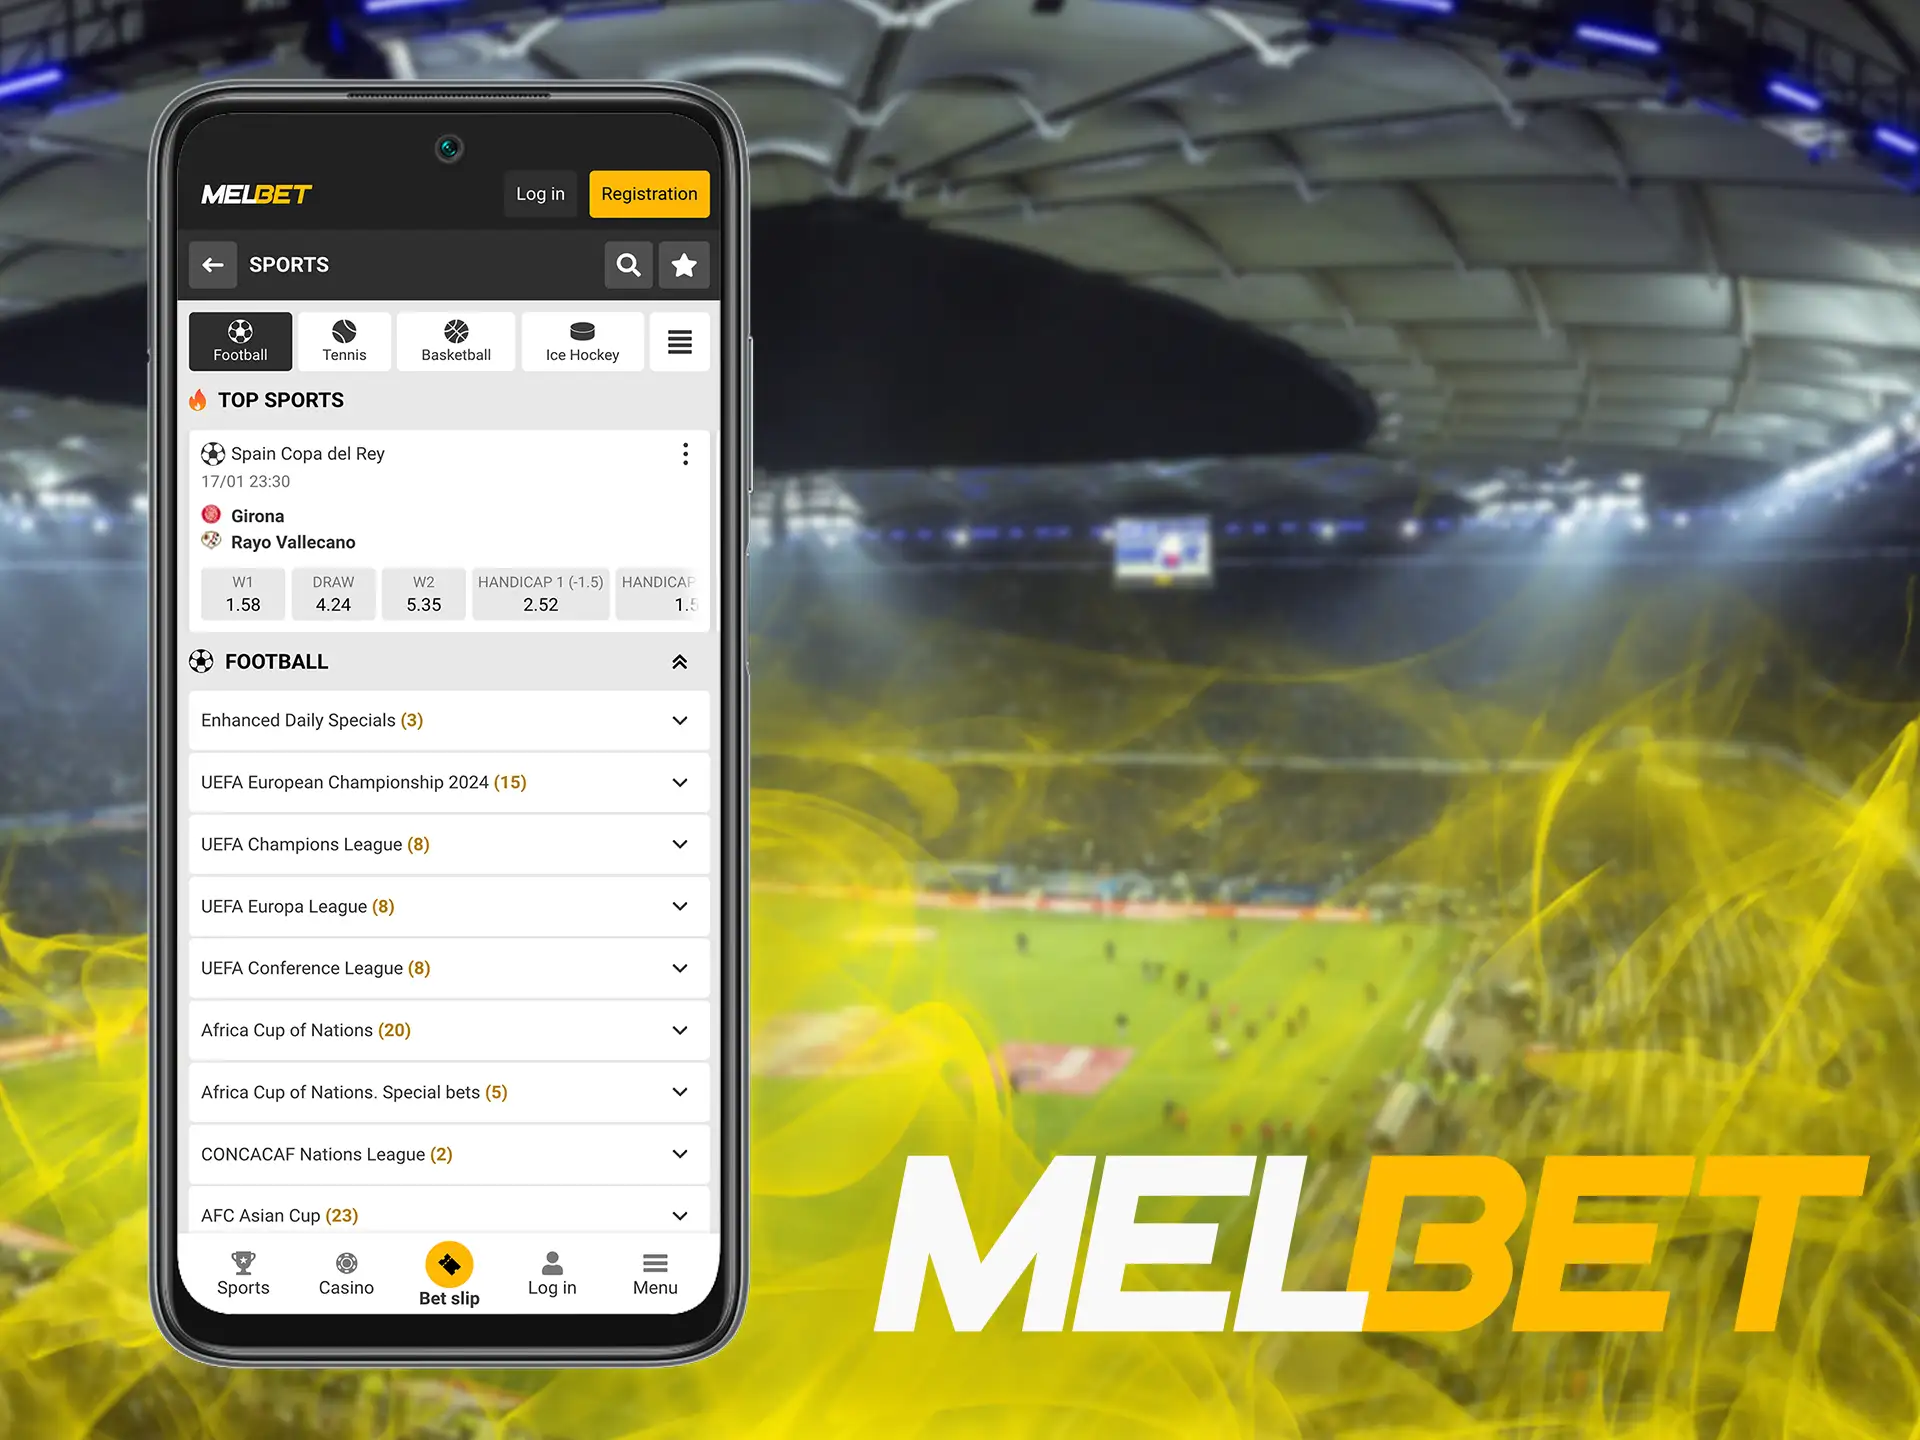 Users from India can easily create an account at Melbet to place live bets and enjoy an abundance of matches.